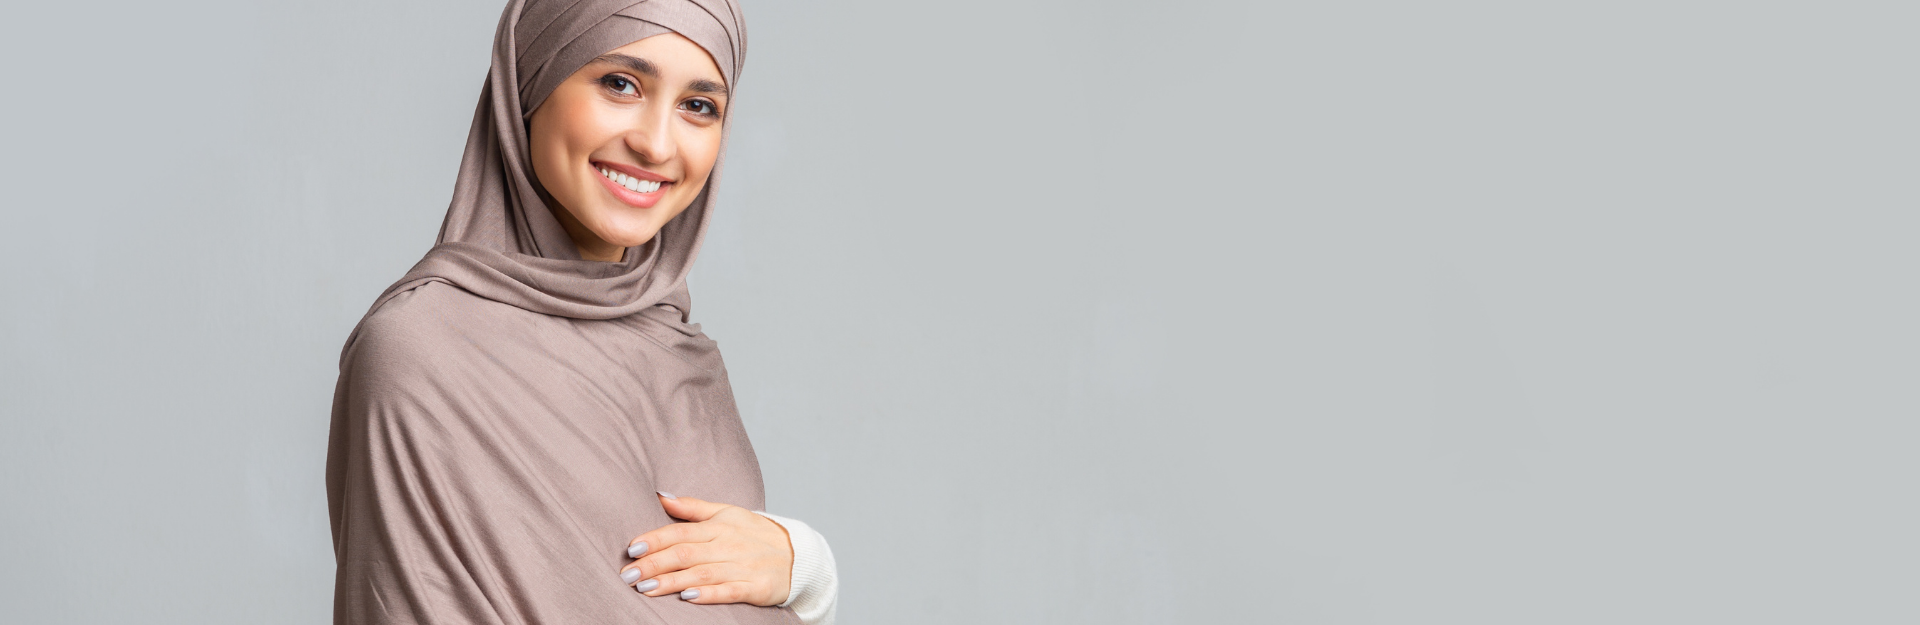 Smiling pregnant person with light brown hijab